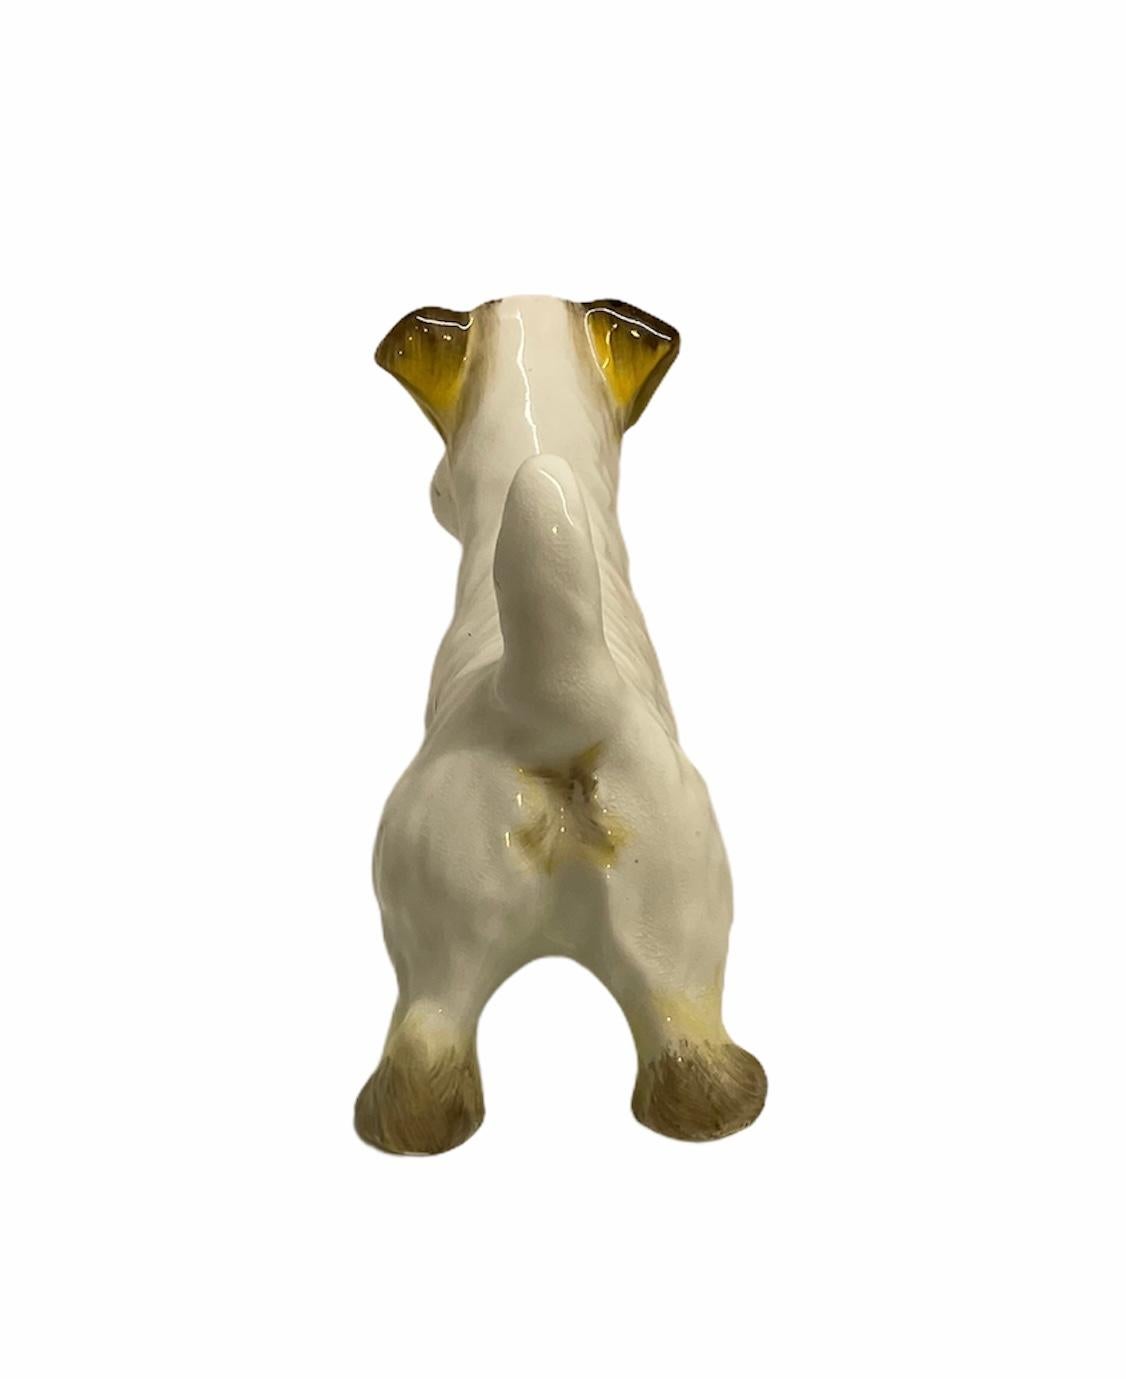 This is an adorable English porcelain small figurine of a Scottish dog. It is hand painted white and highlighted with yellow-brownish spots. Very well made. It is stamped made in England in one of its paws.